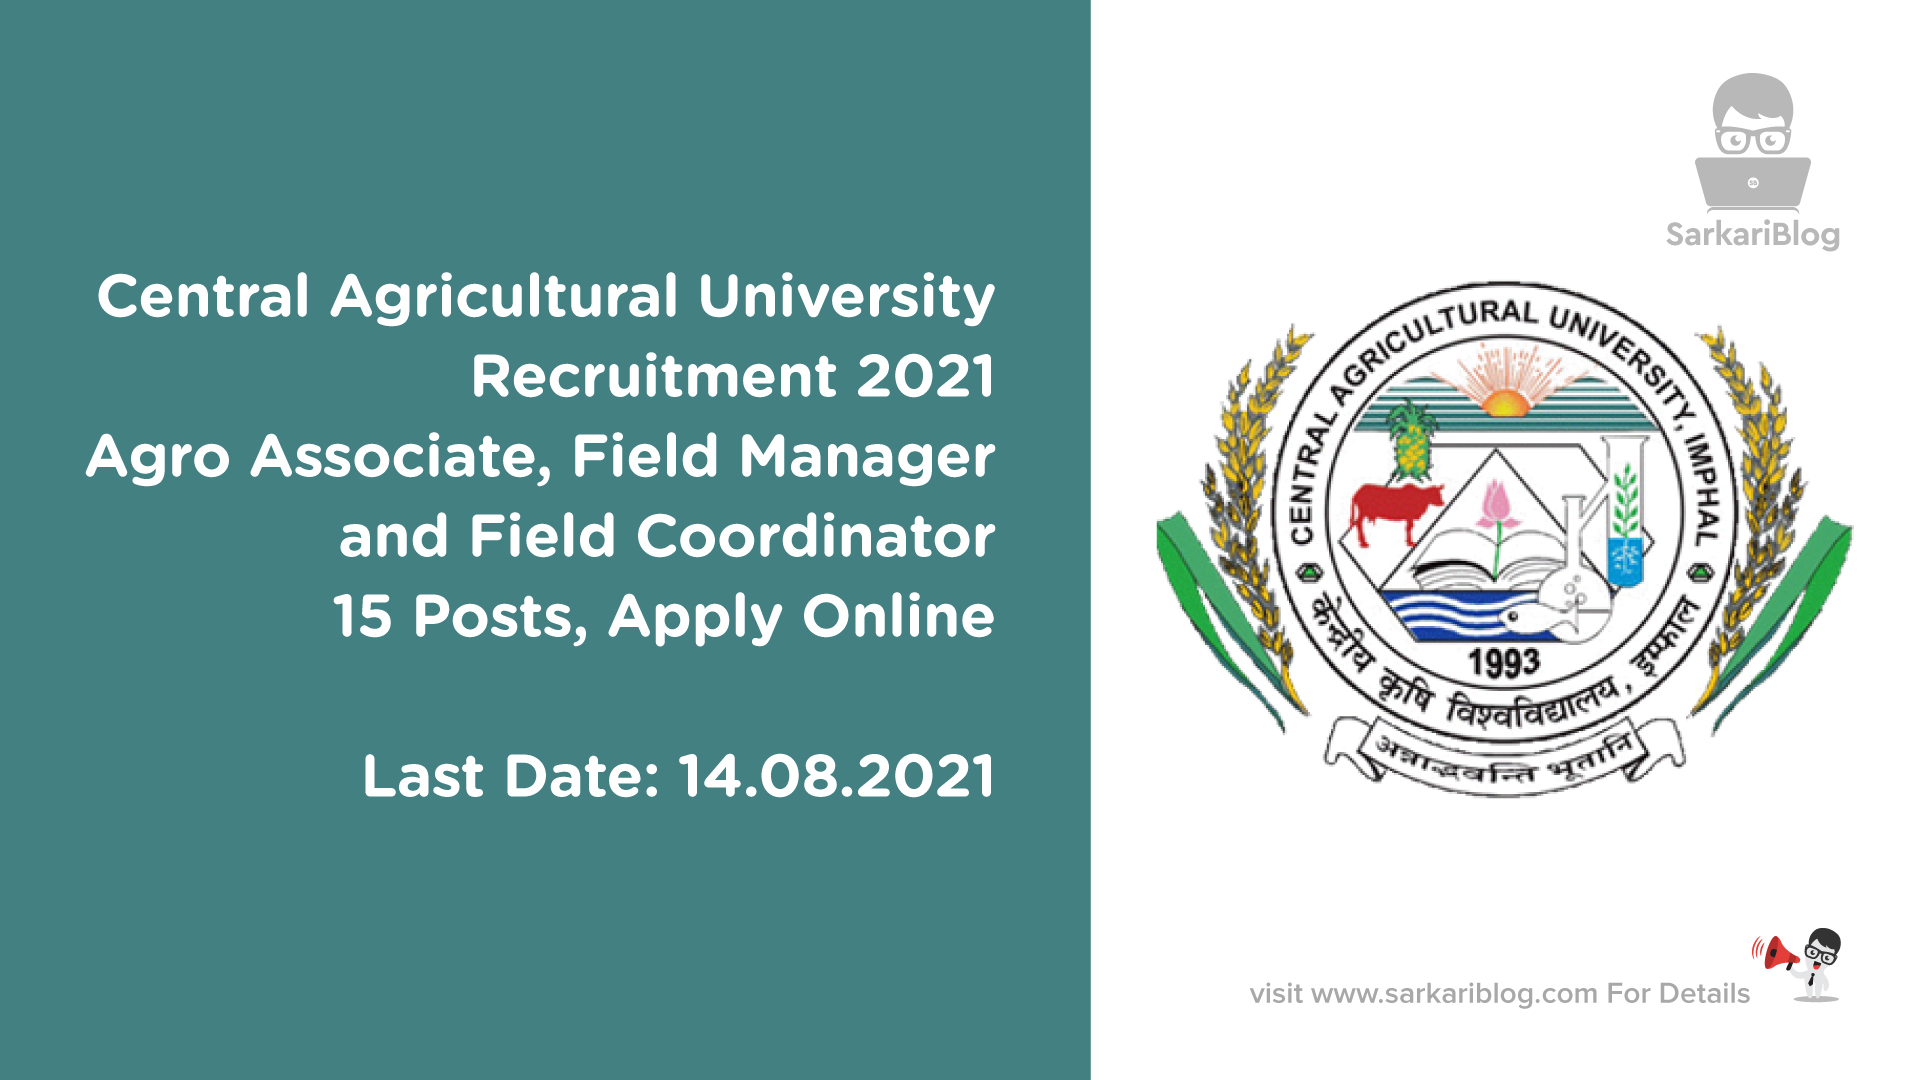 Central Agricultural University Recruitment 2021